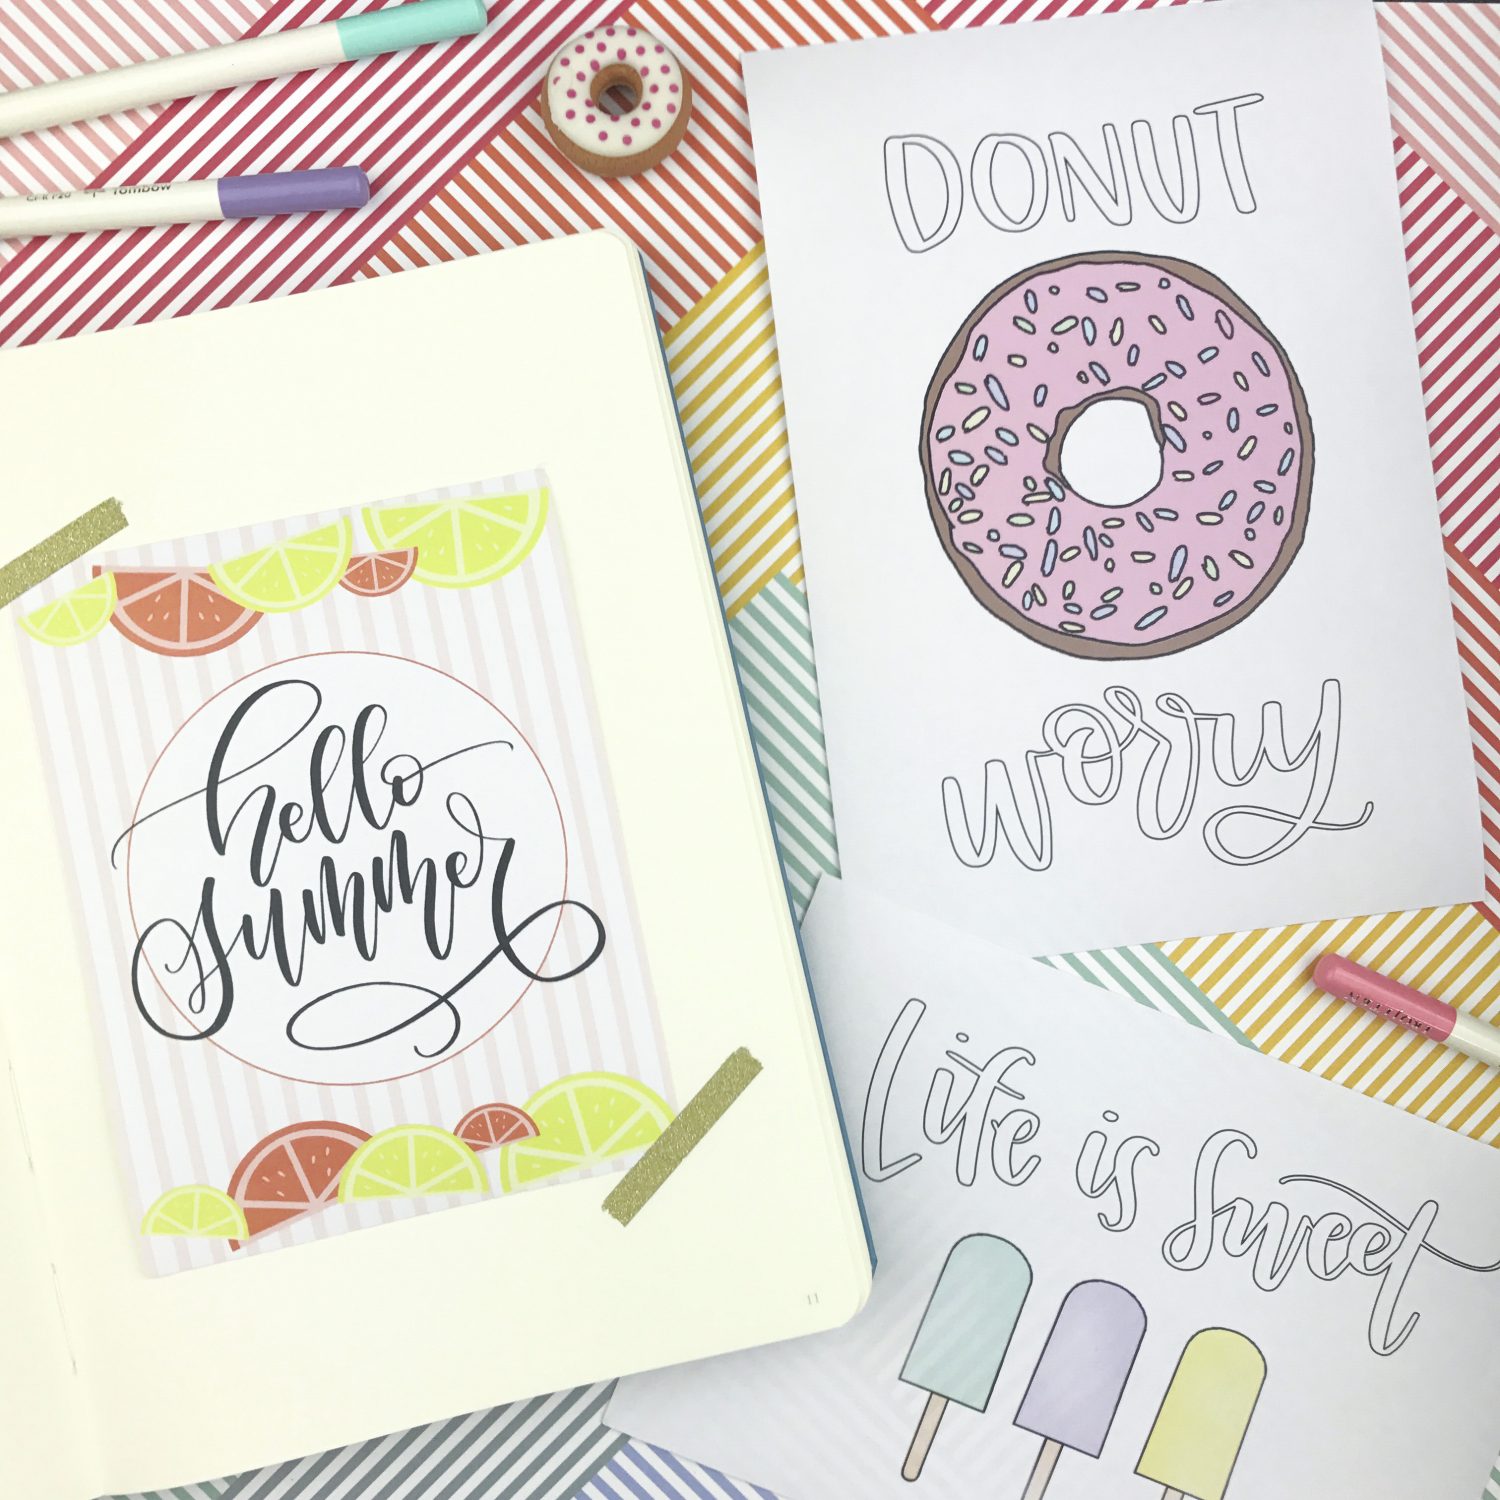 Celebrate National Scrapbook Day with @tombowusa by downloading these free printables!